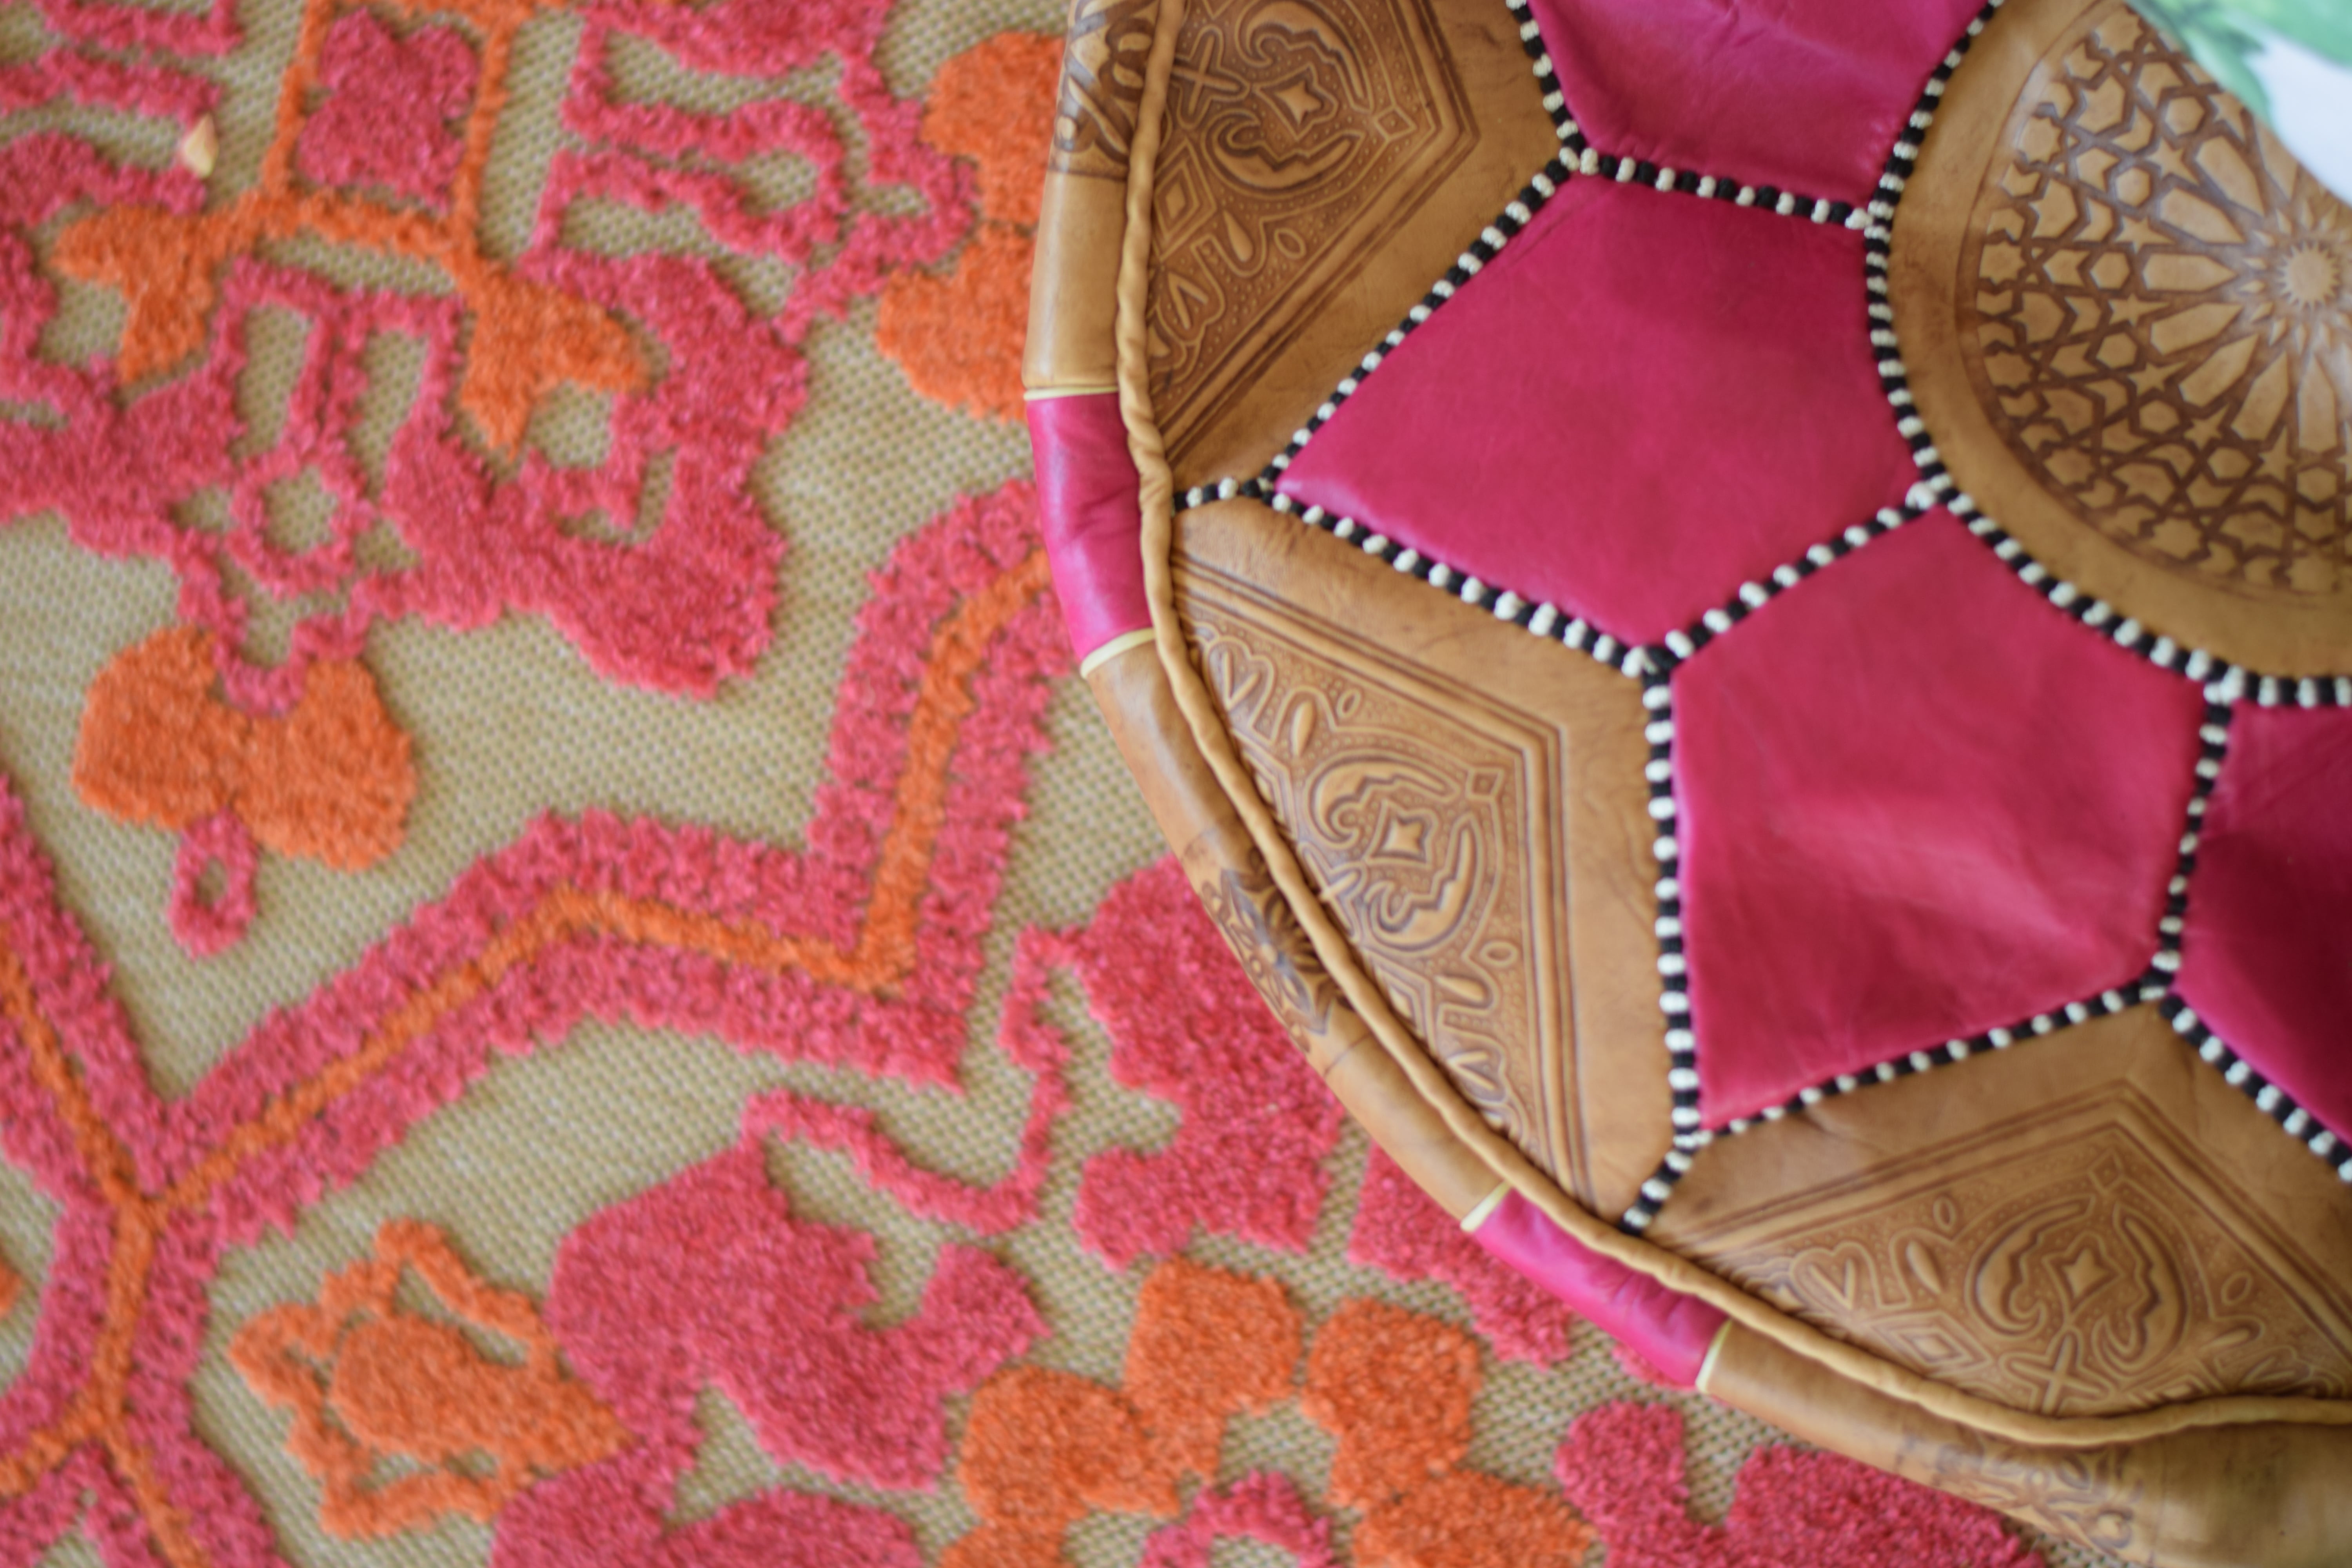 Leather pouf on pink and orange rug